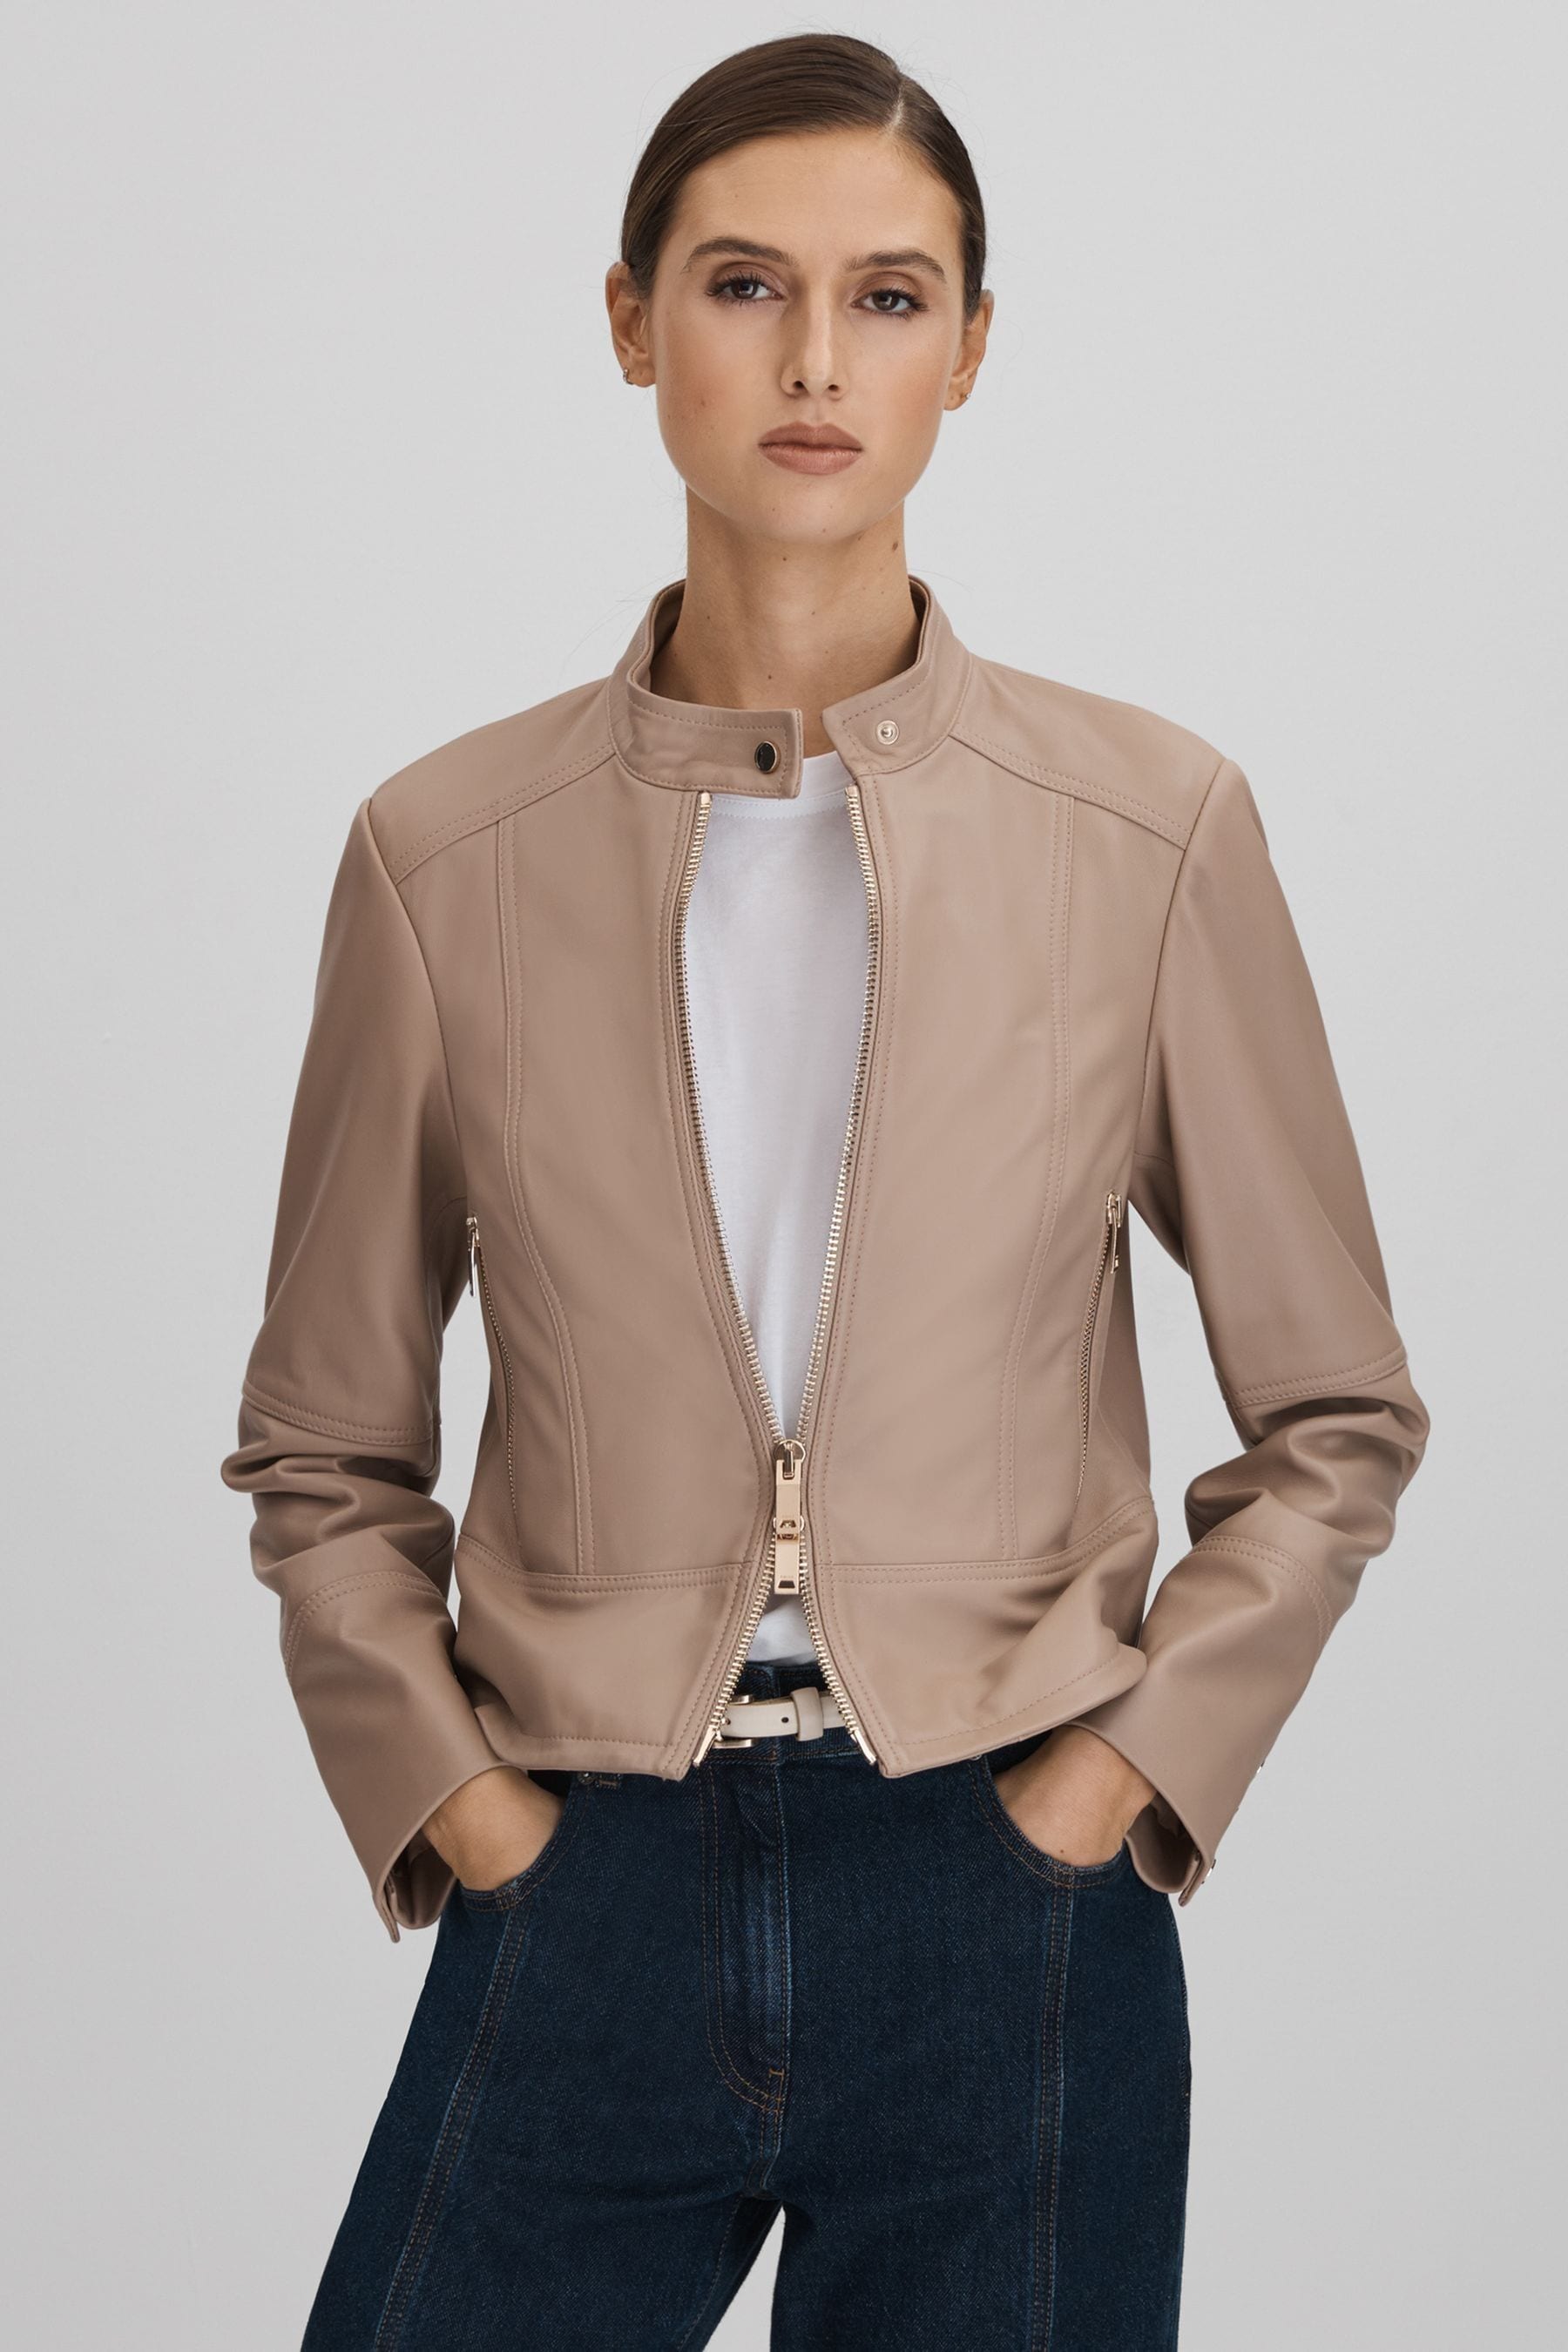 Reiss Lola - Neutral Leather Zip-front Jacket, Us 2